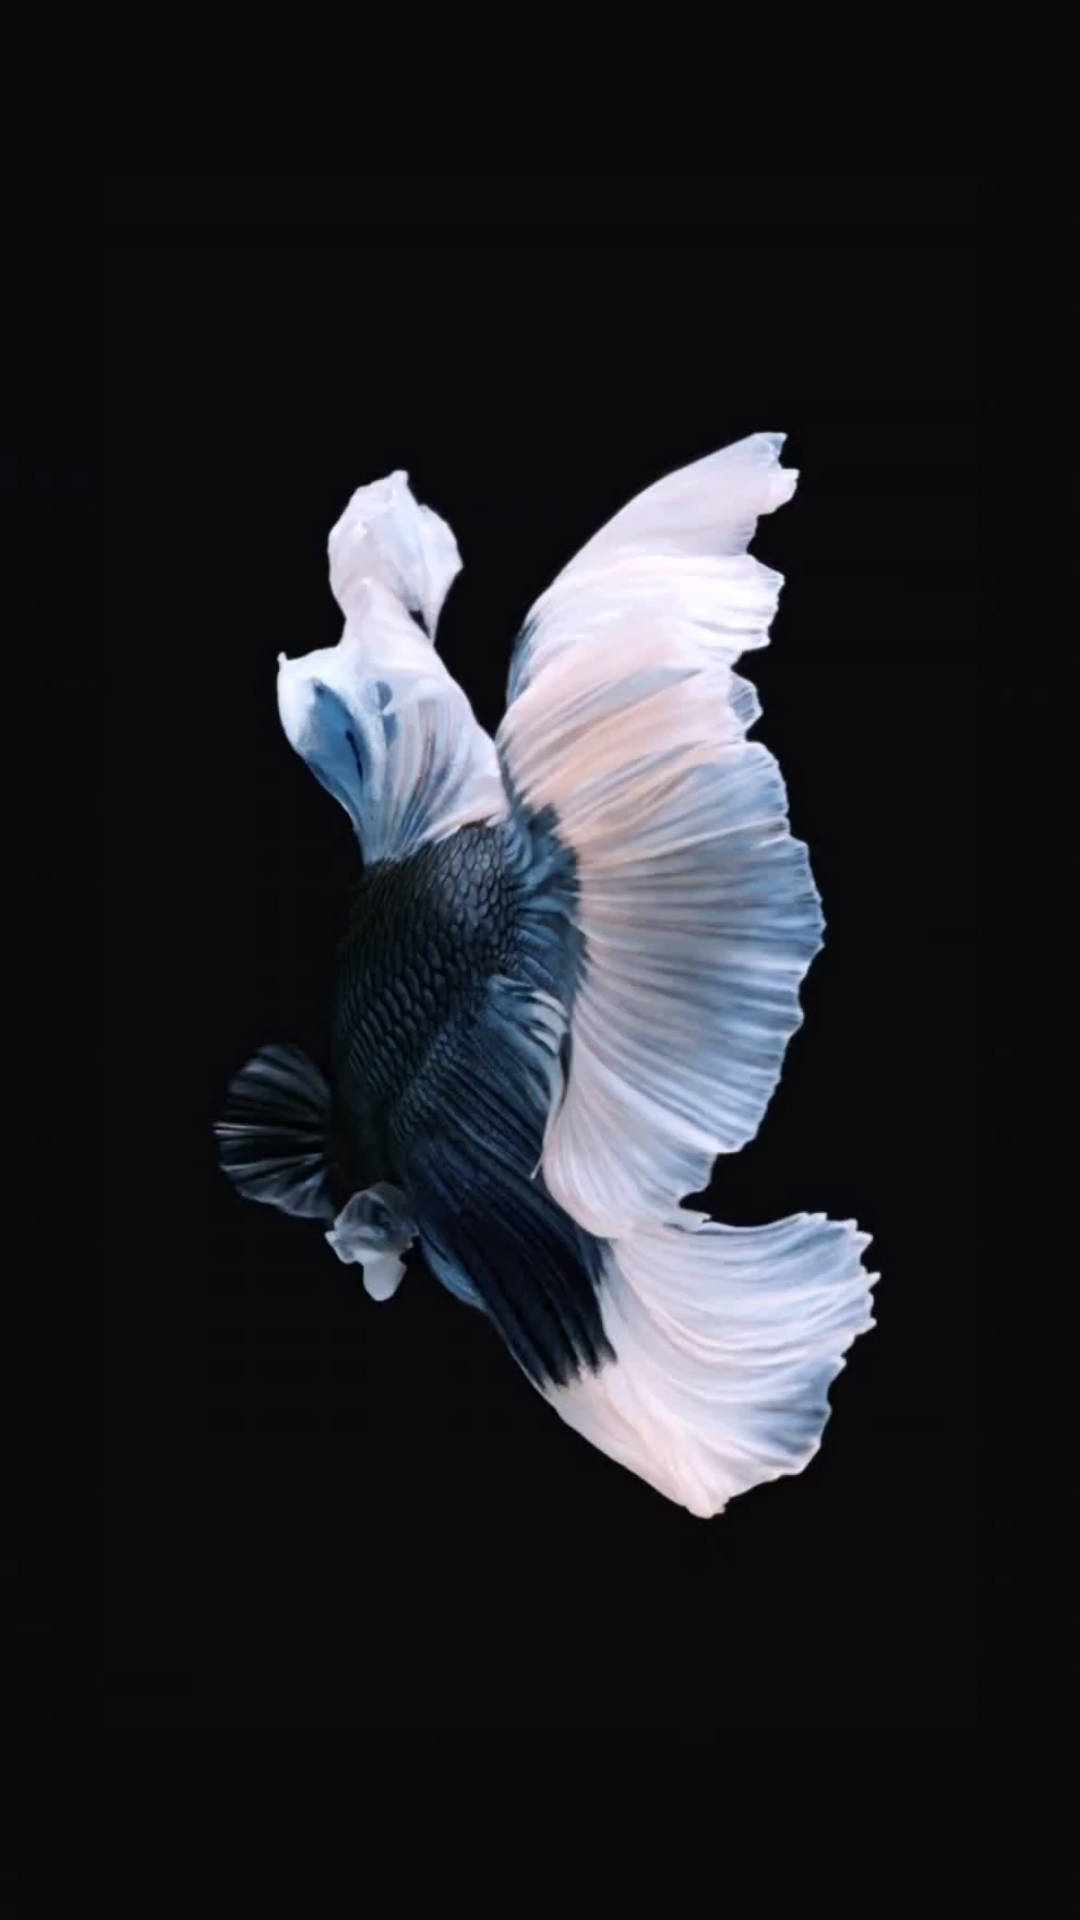 Black And White Siamese Fighting Fish Iphone Background